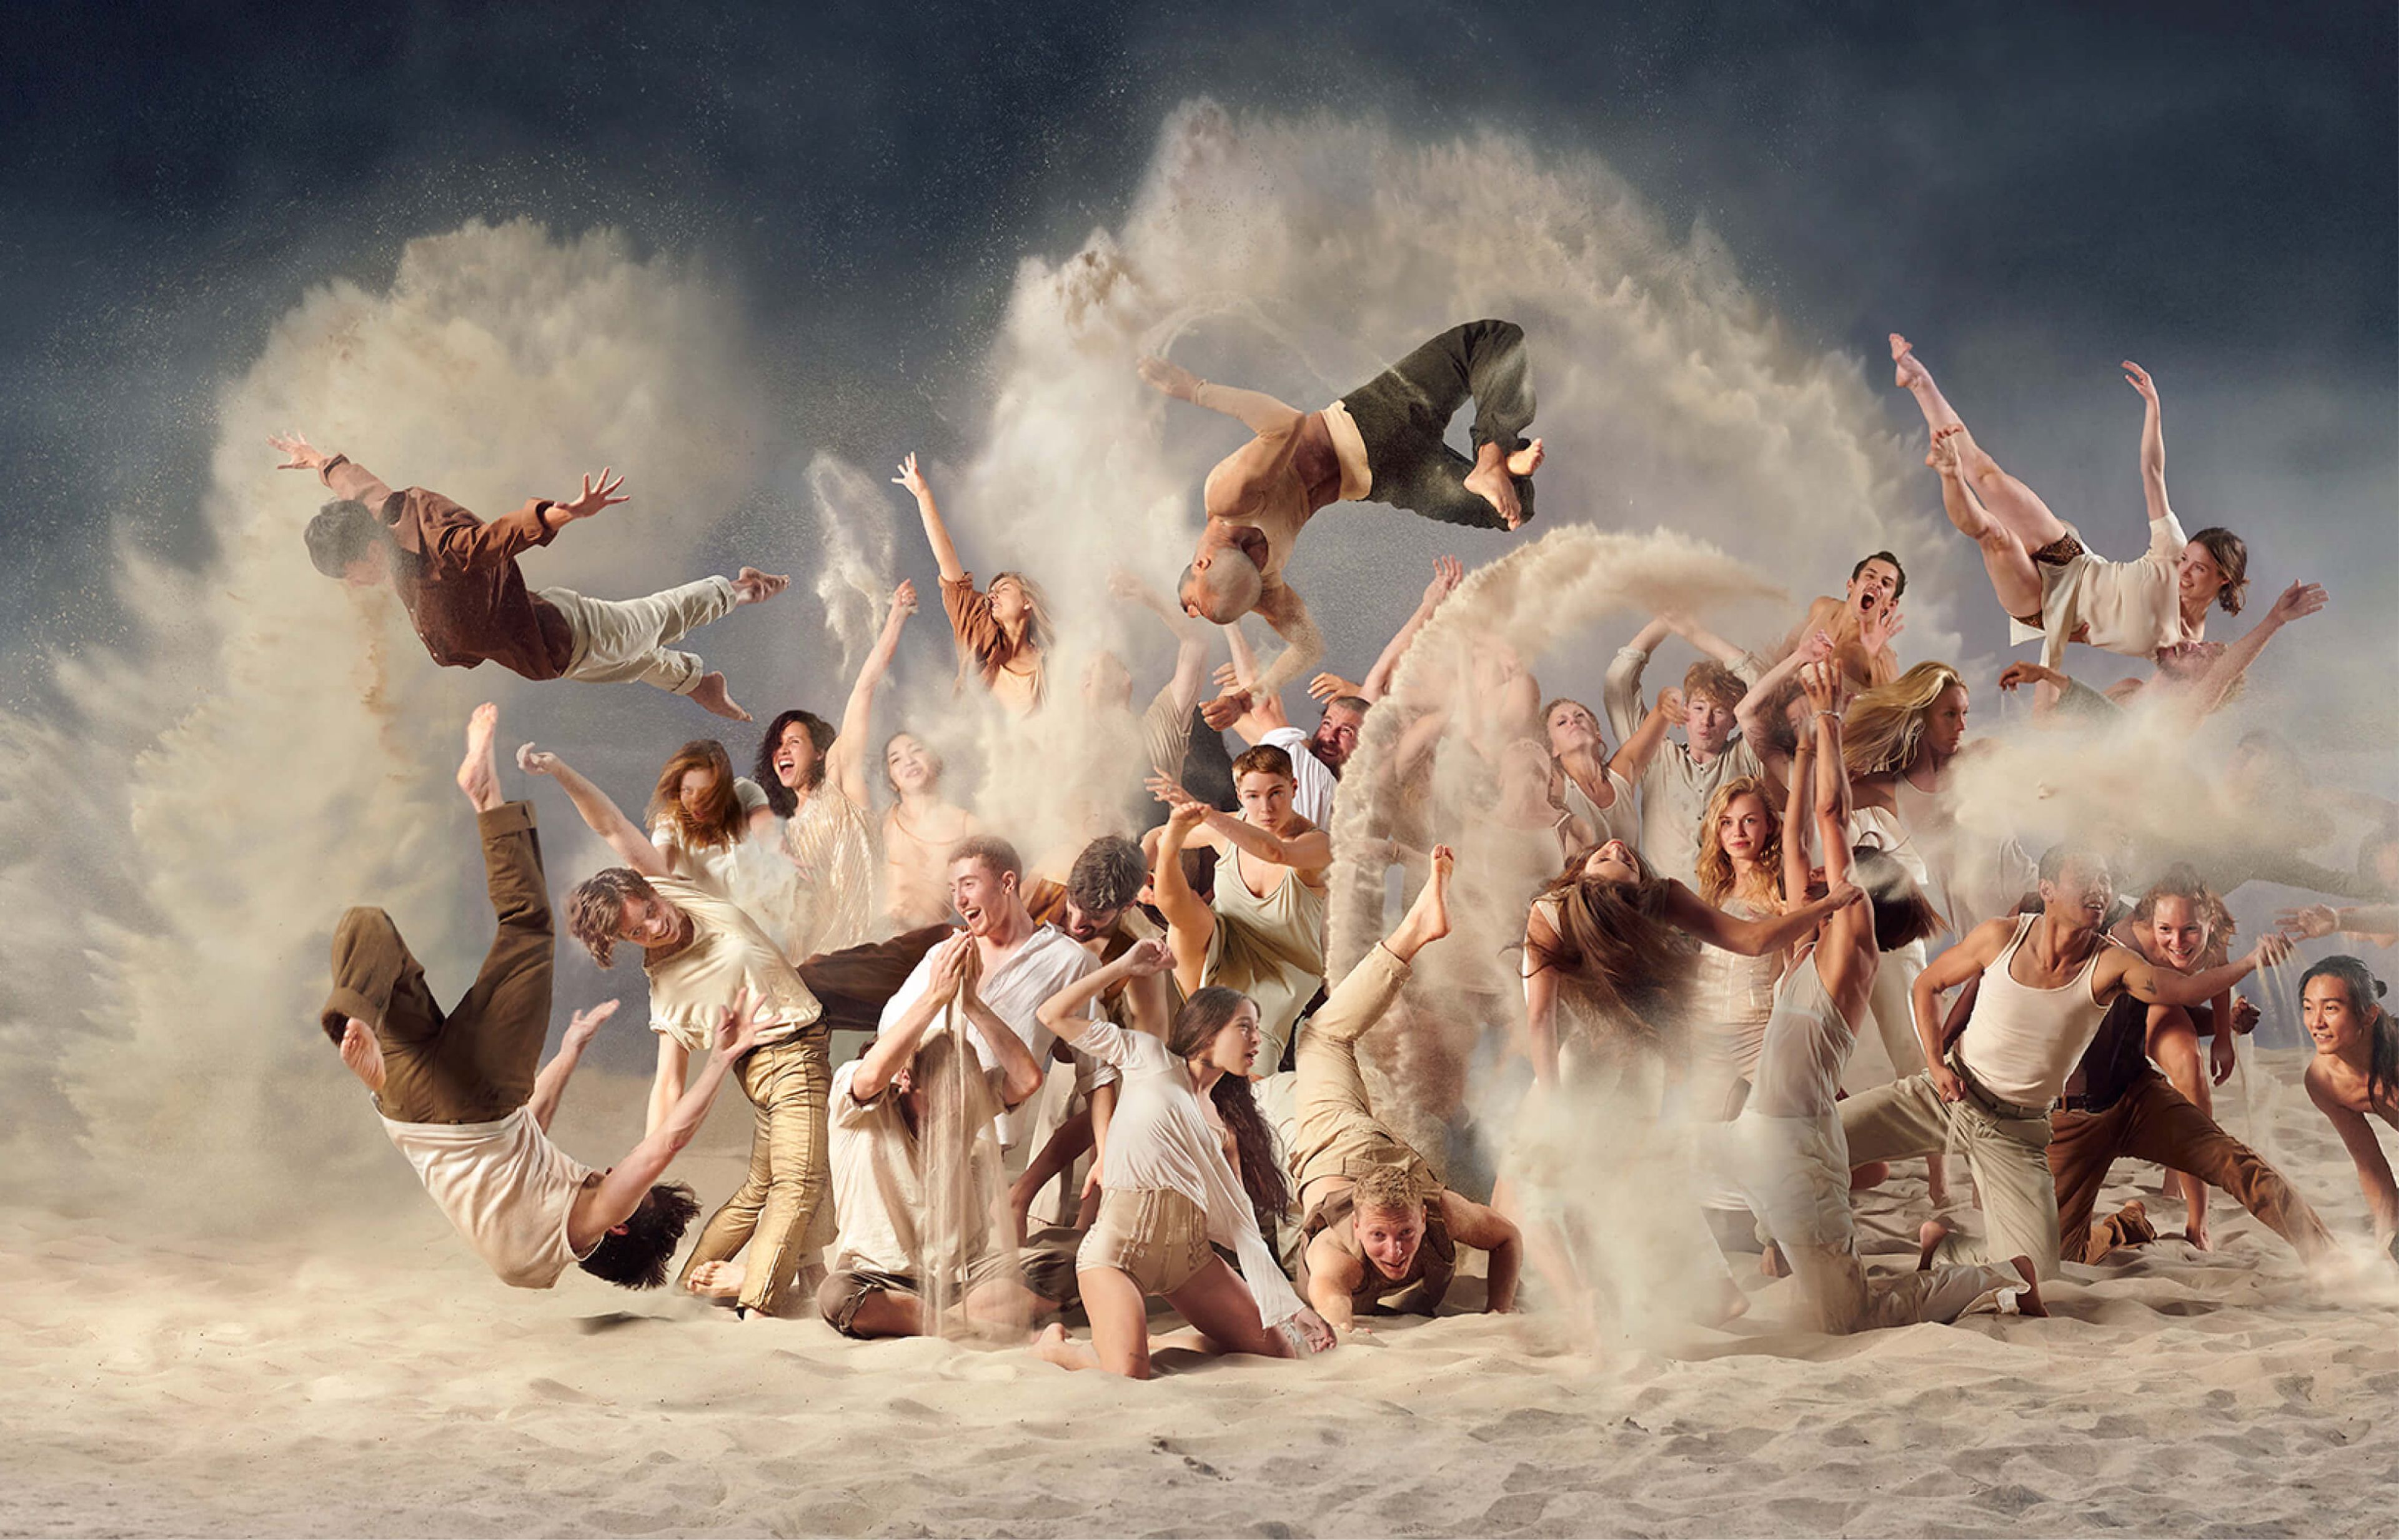 An illustrative photo from a show production, showing a crowd of people dressed in whites and browns, playing and dancing in sand